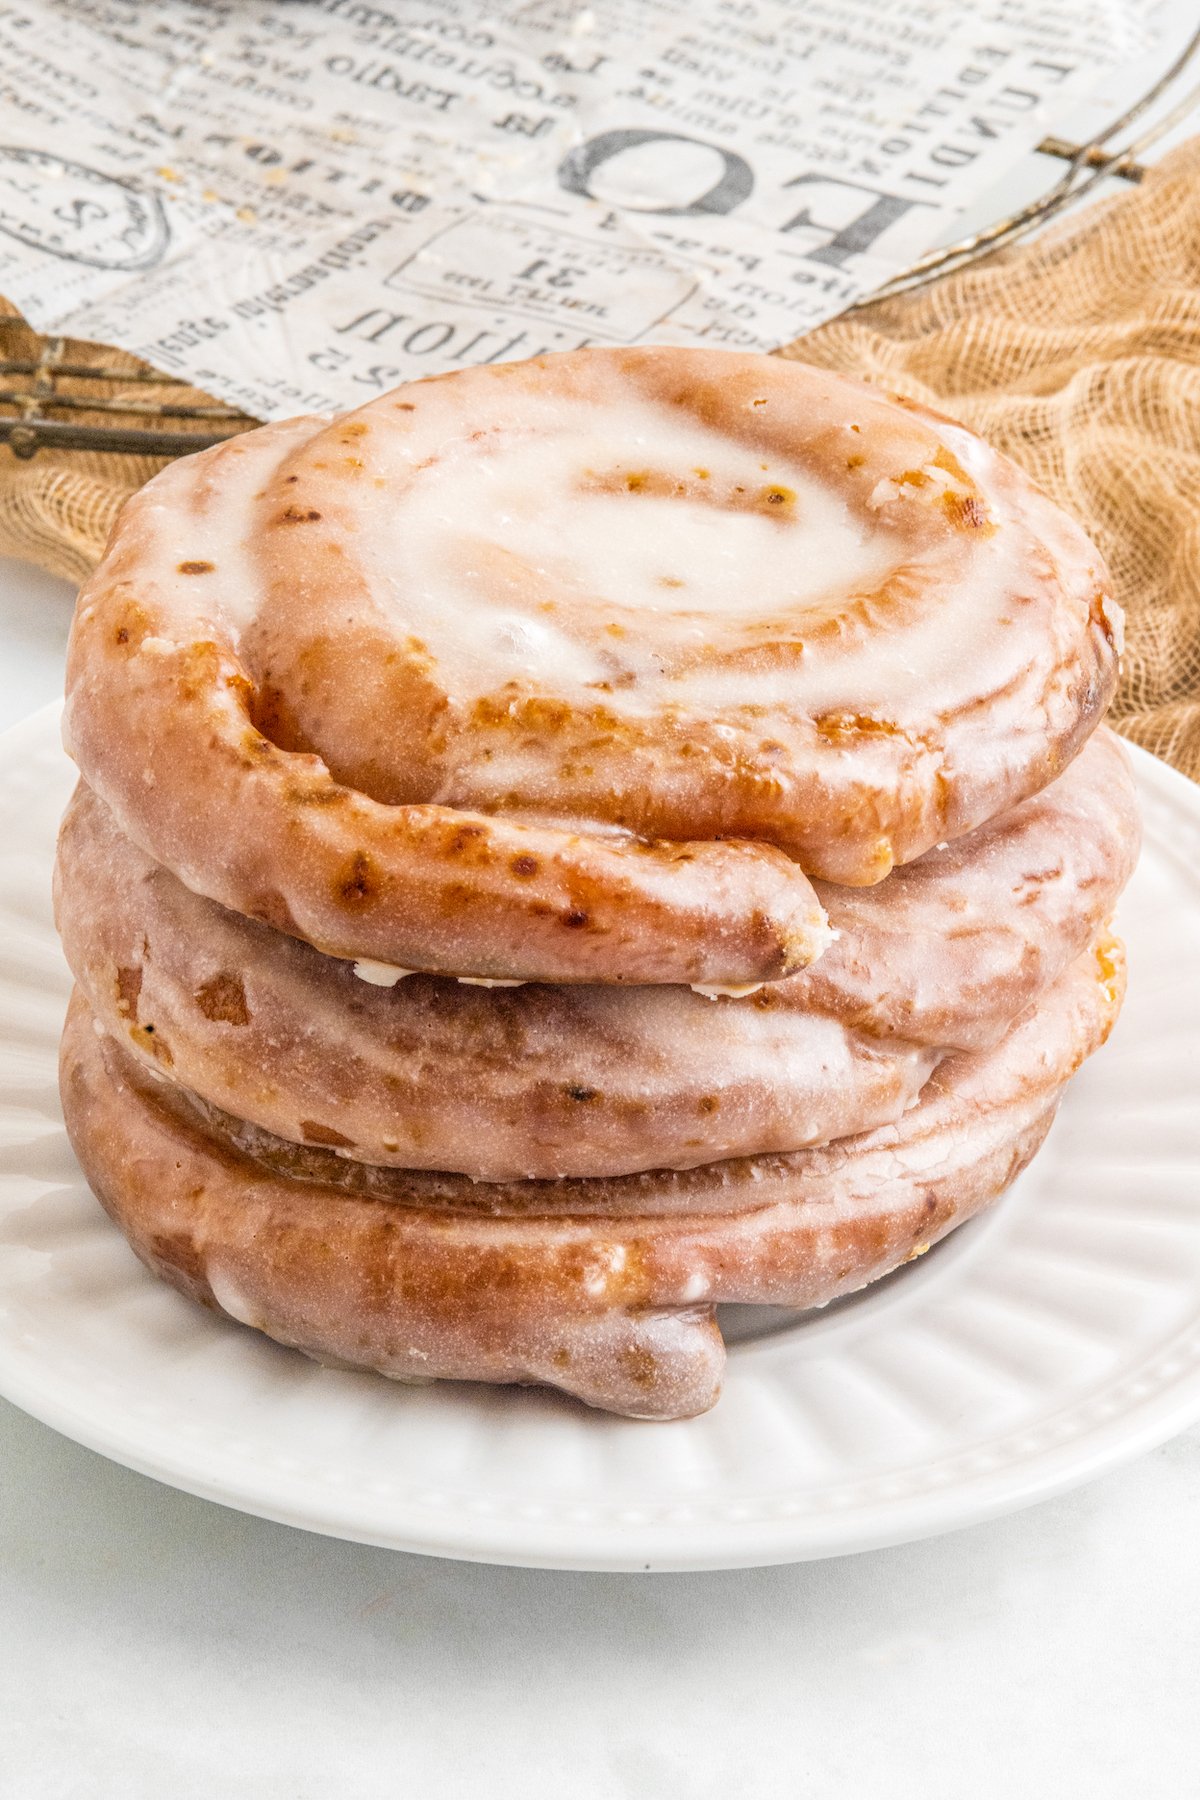 Three honey buns stacked on a plate.